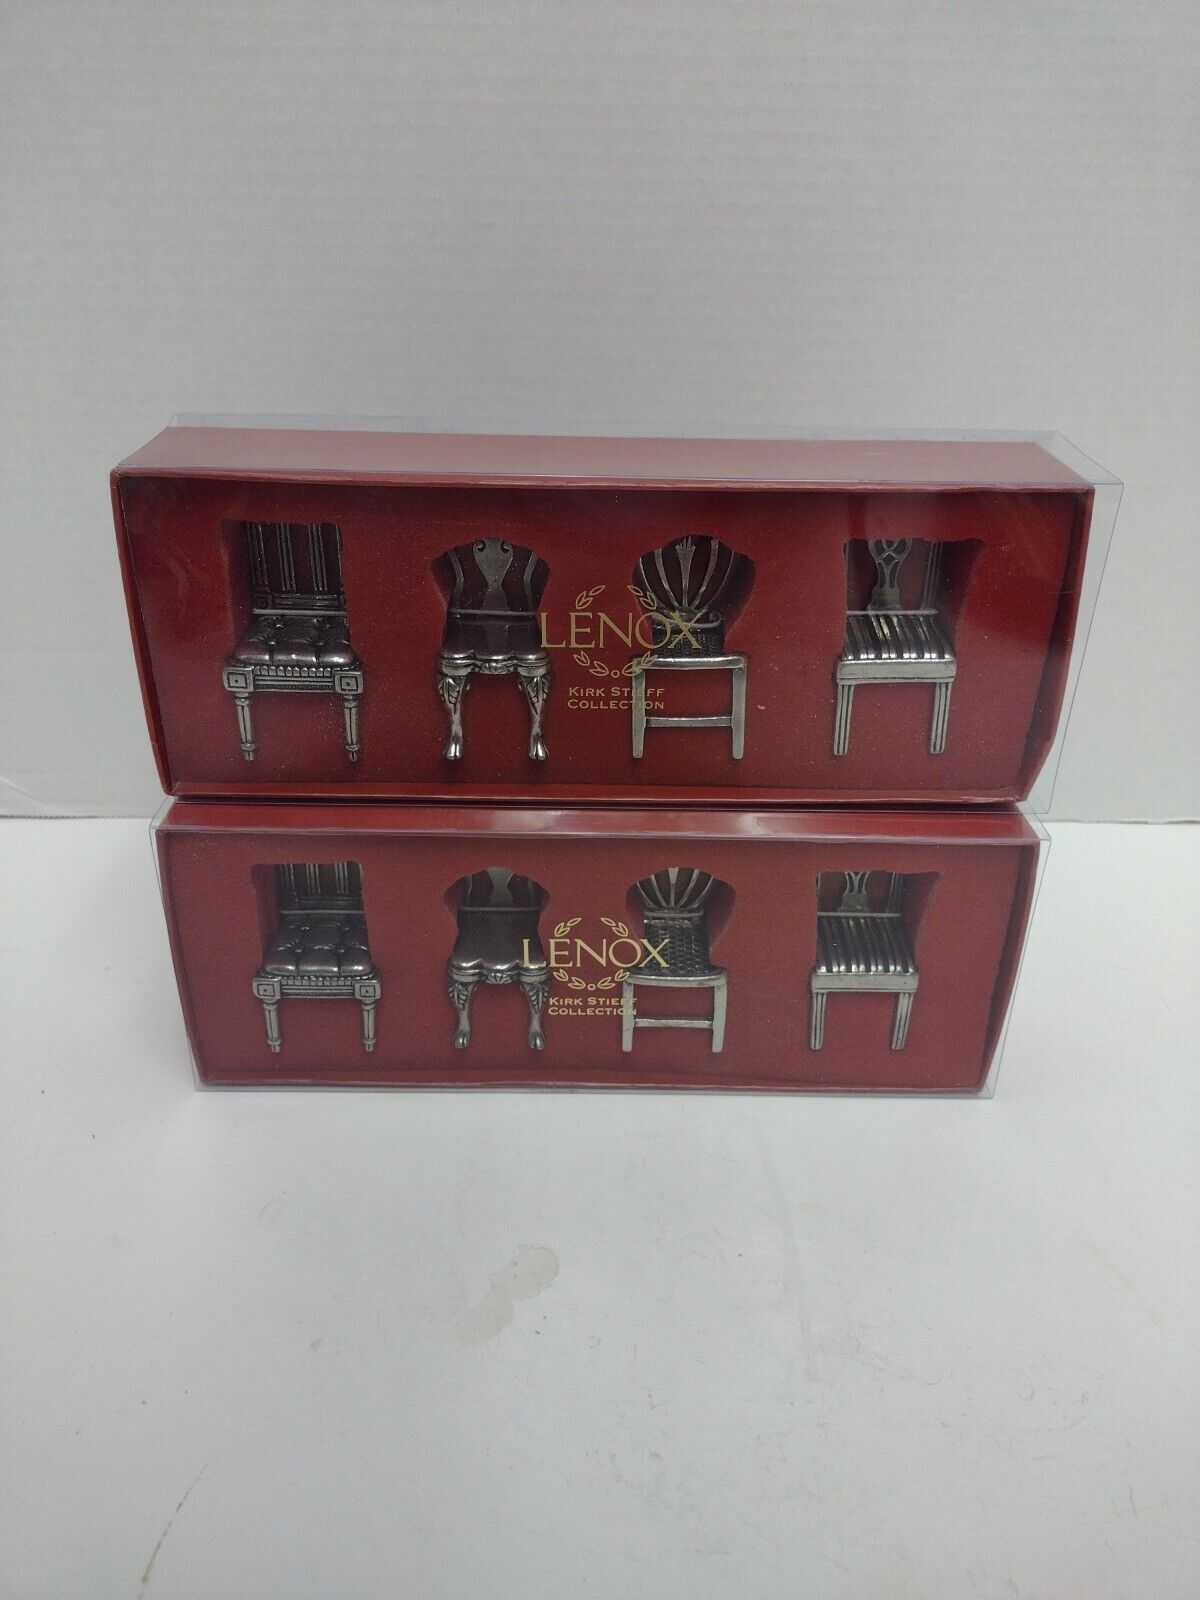 Lenox Kirk Stief Collection Card Holders Four Chair Ornaments New In Box